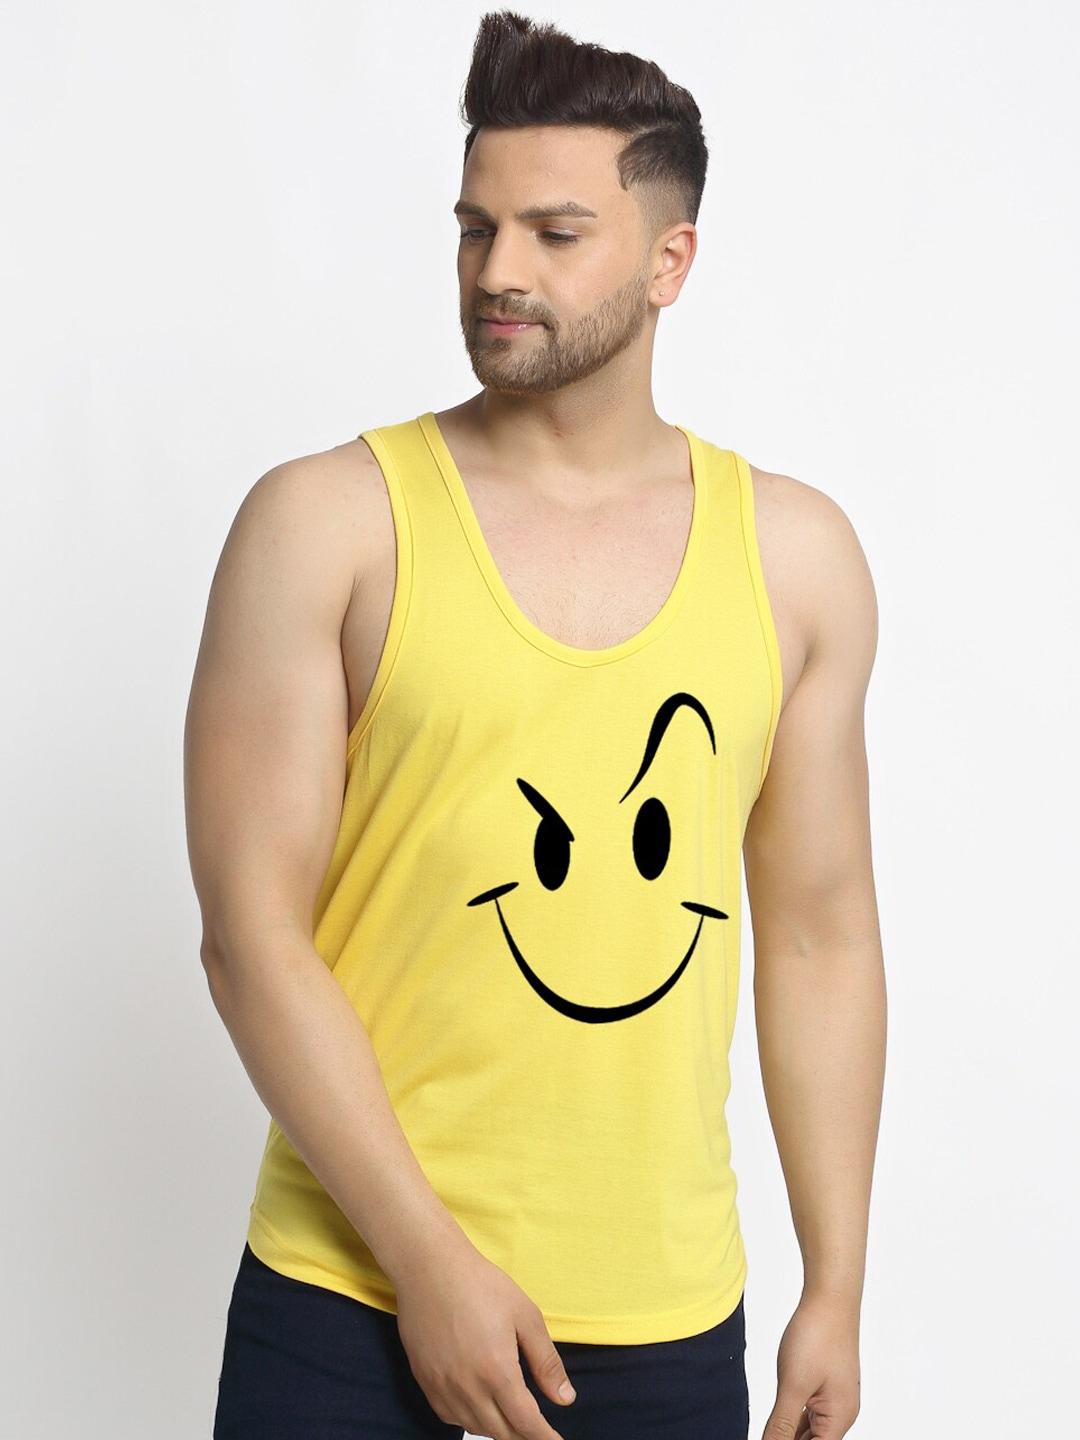 friskers men yellow printed cotton gym innerwear vests